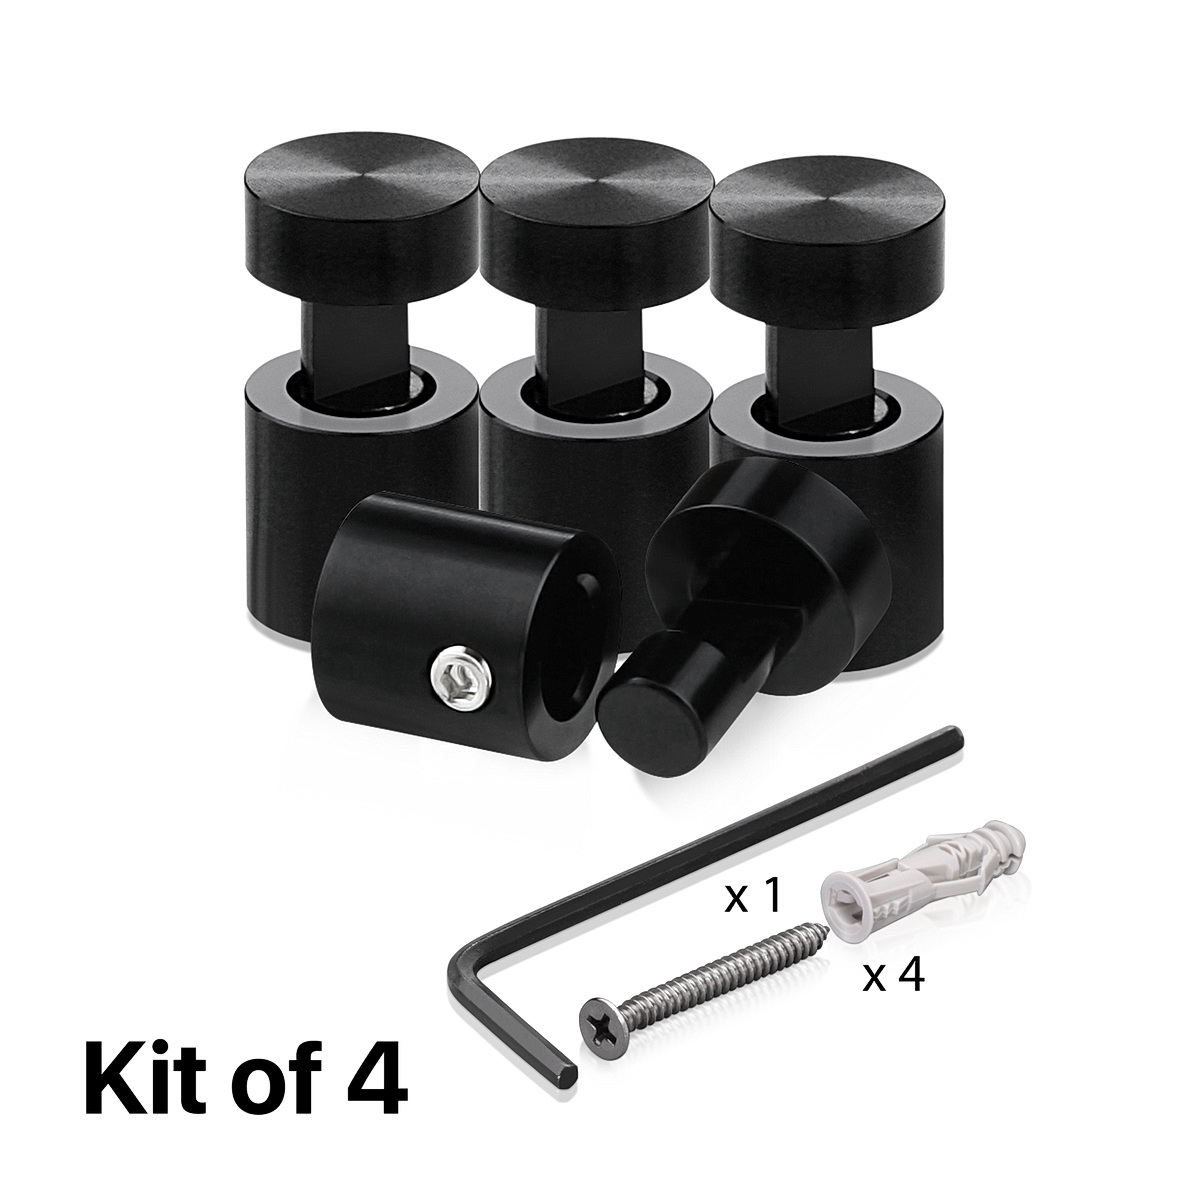 (Set of 4) 1/2'' Diameter X 1/2''  Barrel Length, Aluminum Black Anodized Finish. Adjustable Edge Grip Standoff with (4) 2208Z Screw and (4) LANC1 Anchor  for concrete/drywall (For Inside Use Only)